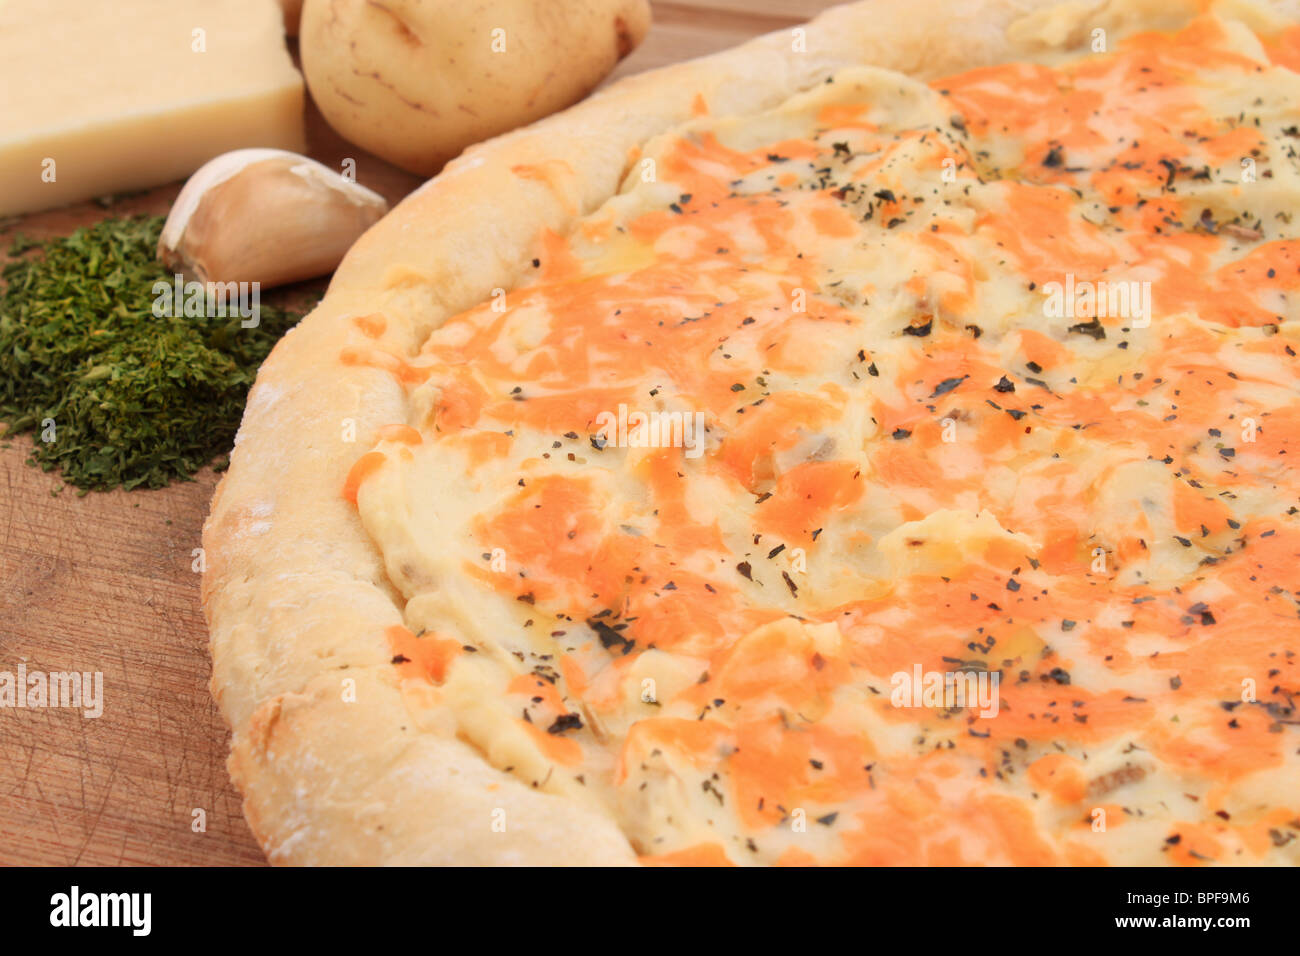 Gourmet pizza made with fresh dough, potatoes, cheese, and garlic with seasoning Stock Photo